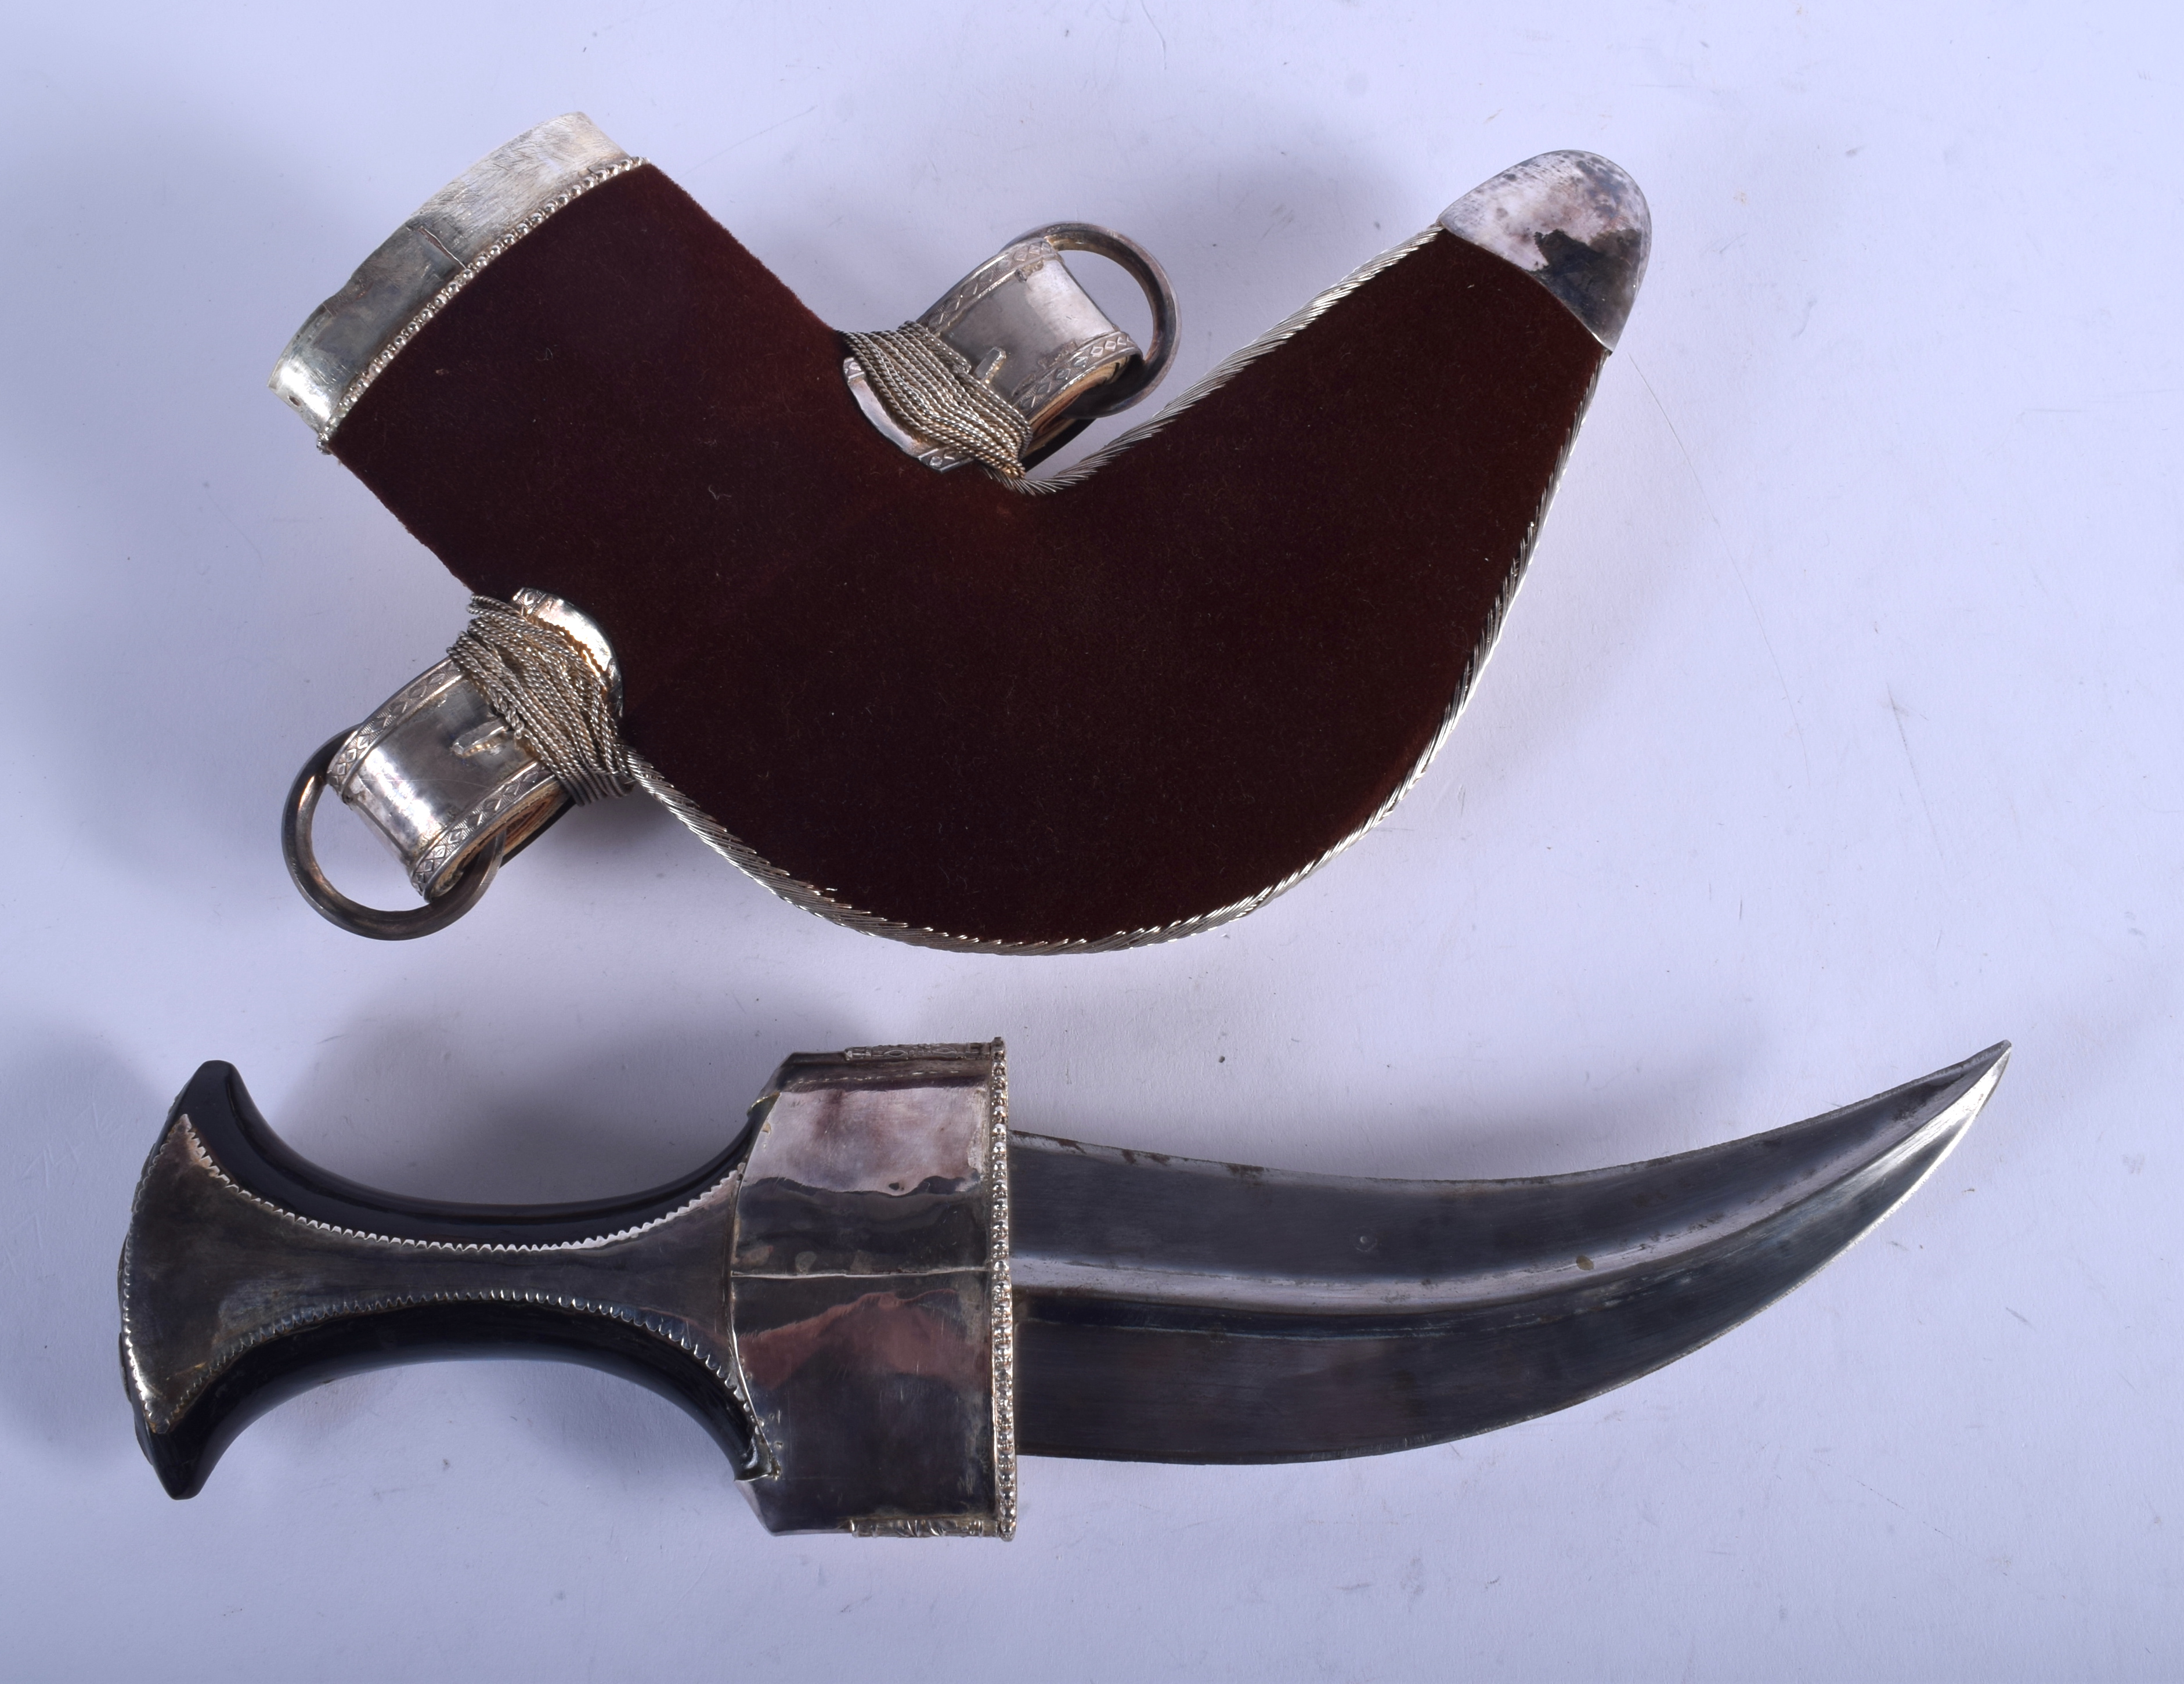 A BOXED EARLY 20TH CENTURY OMANI MIDDLE EASTERN WHITE METAL OVERLAID JAMBIYA DAGGER possibly with a - Image 3 of 3